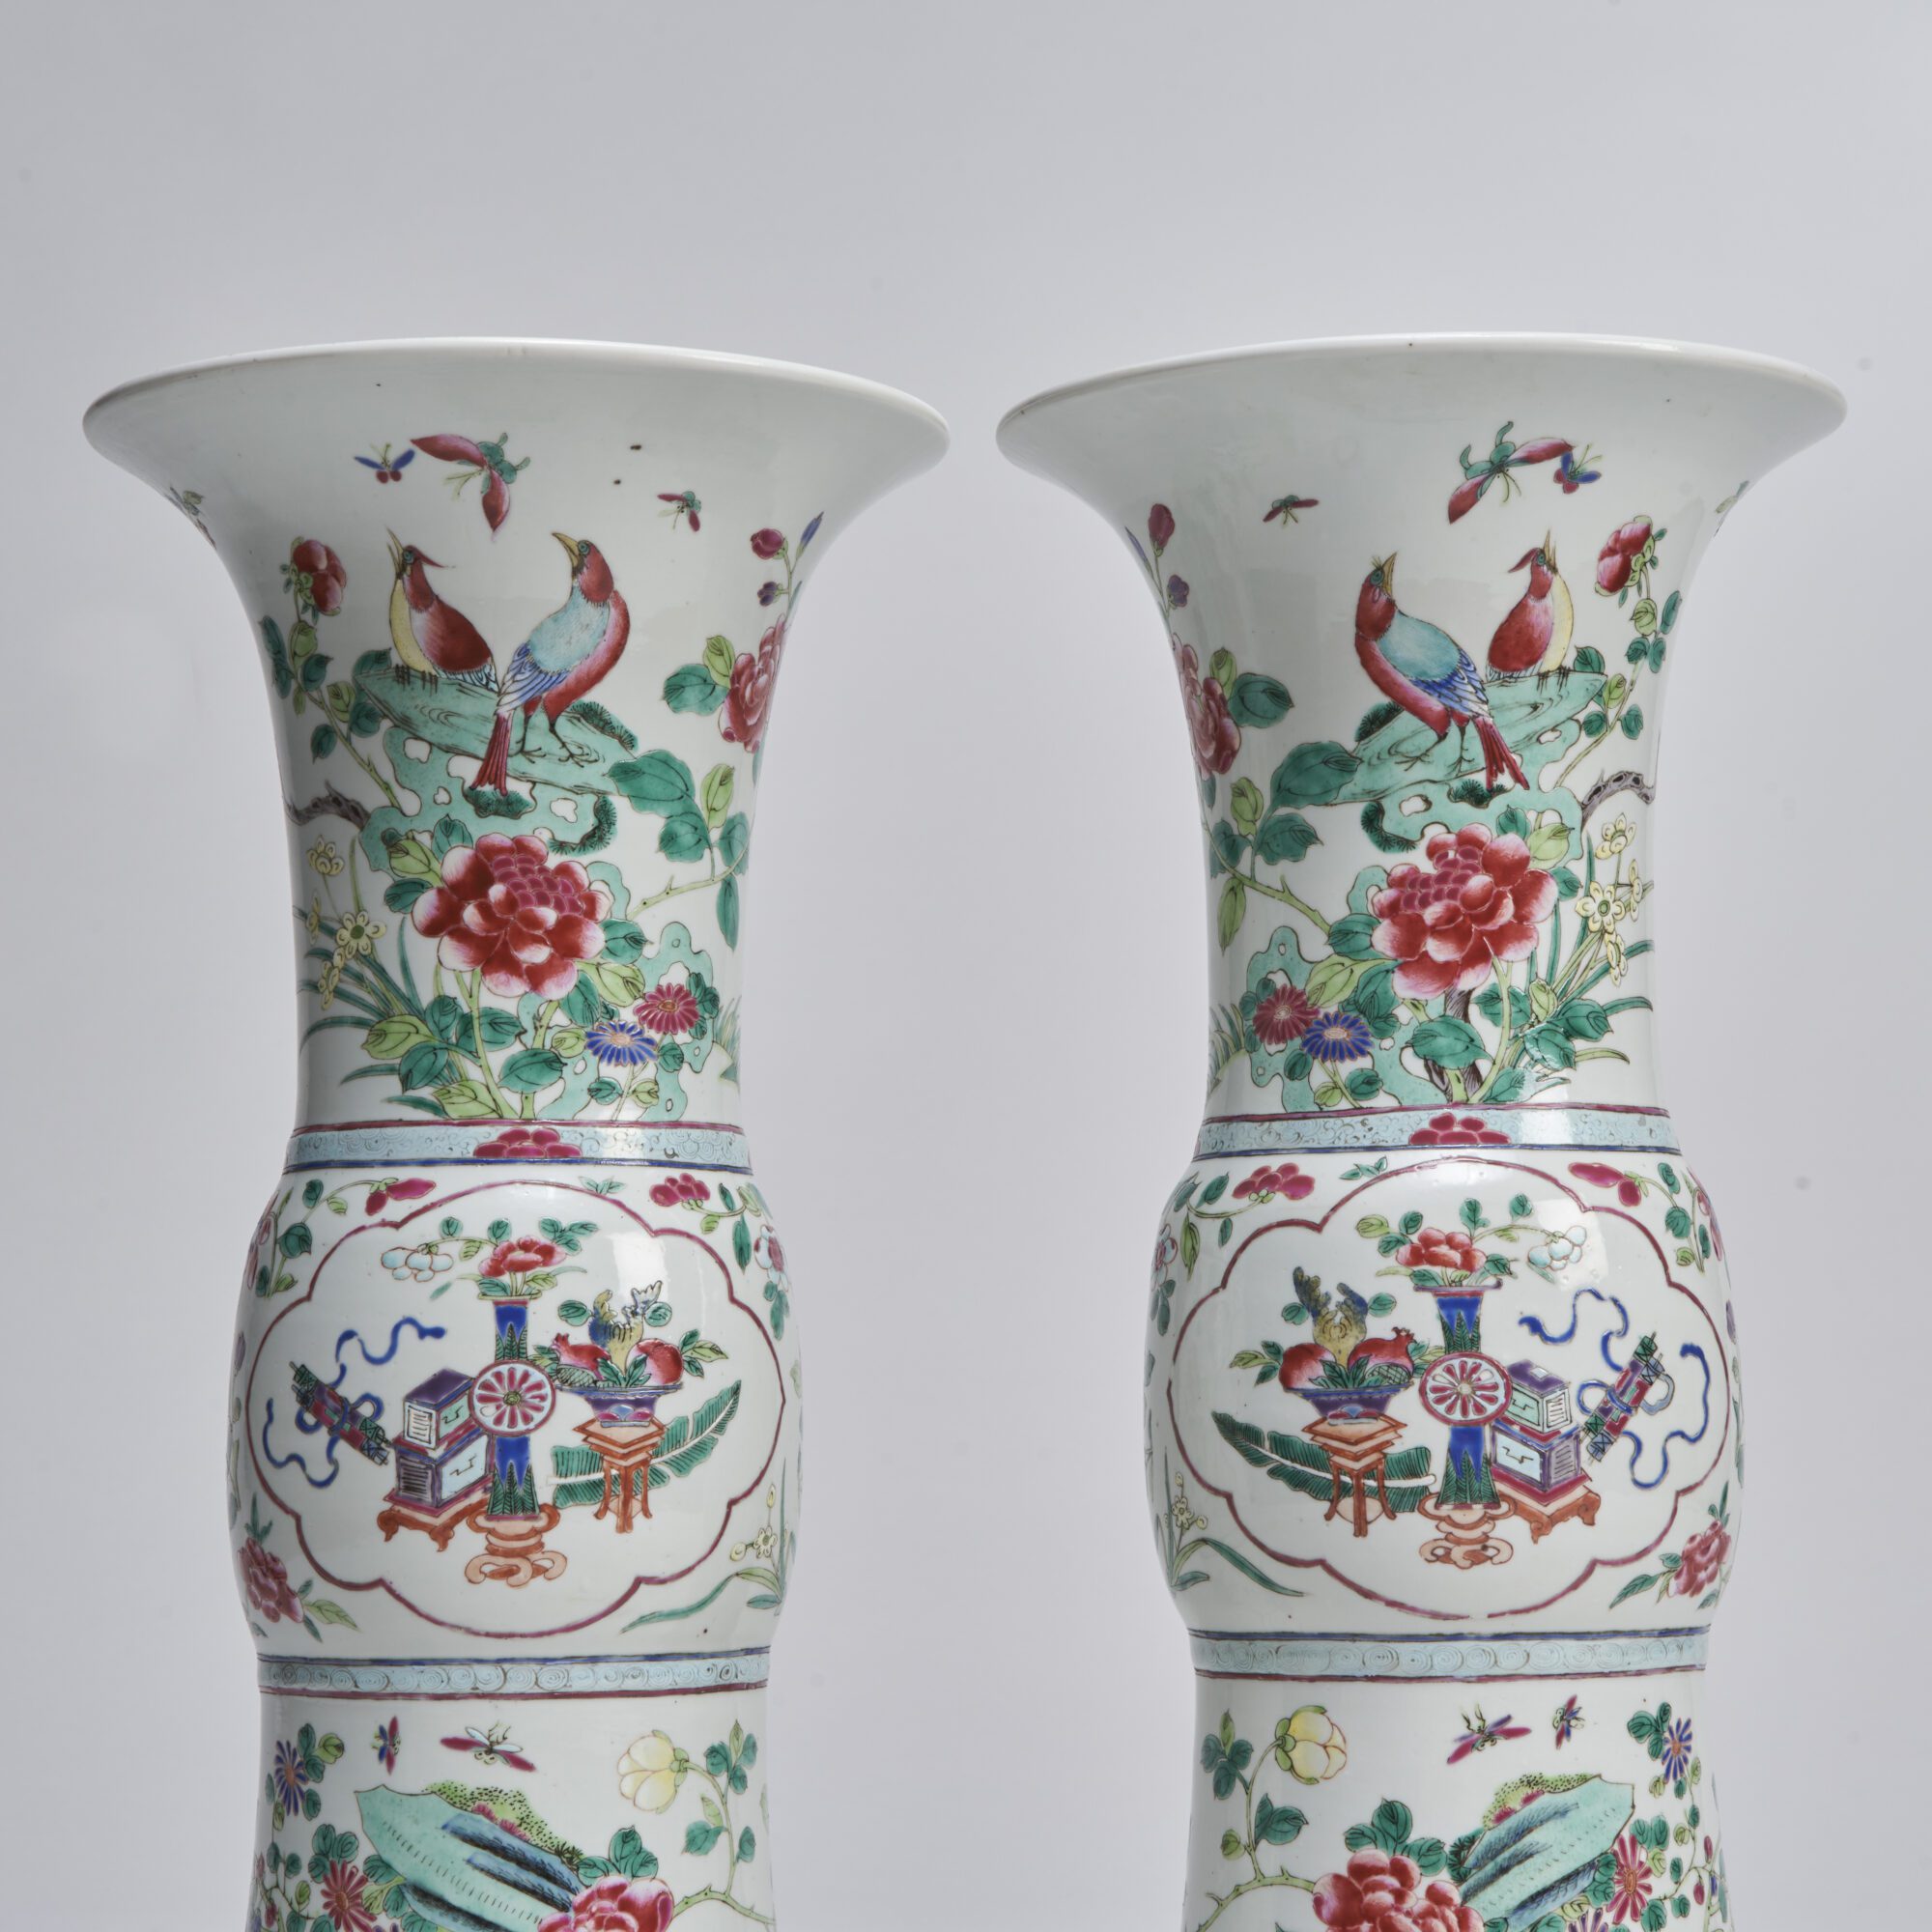 A pair of 19th Century Chinese porcelain Famille Rose beaker vases from Kevin page